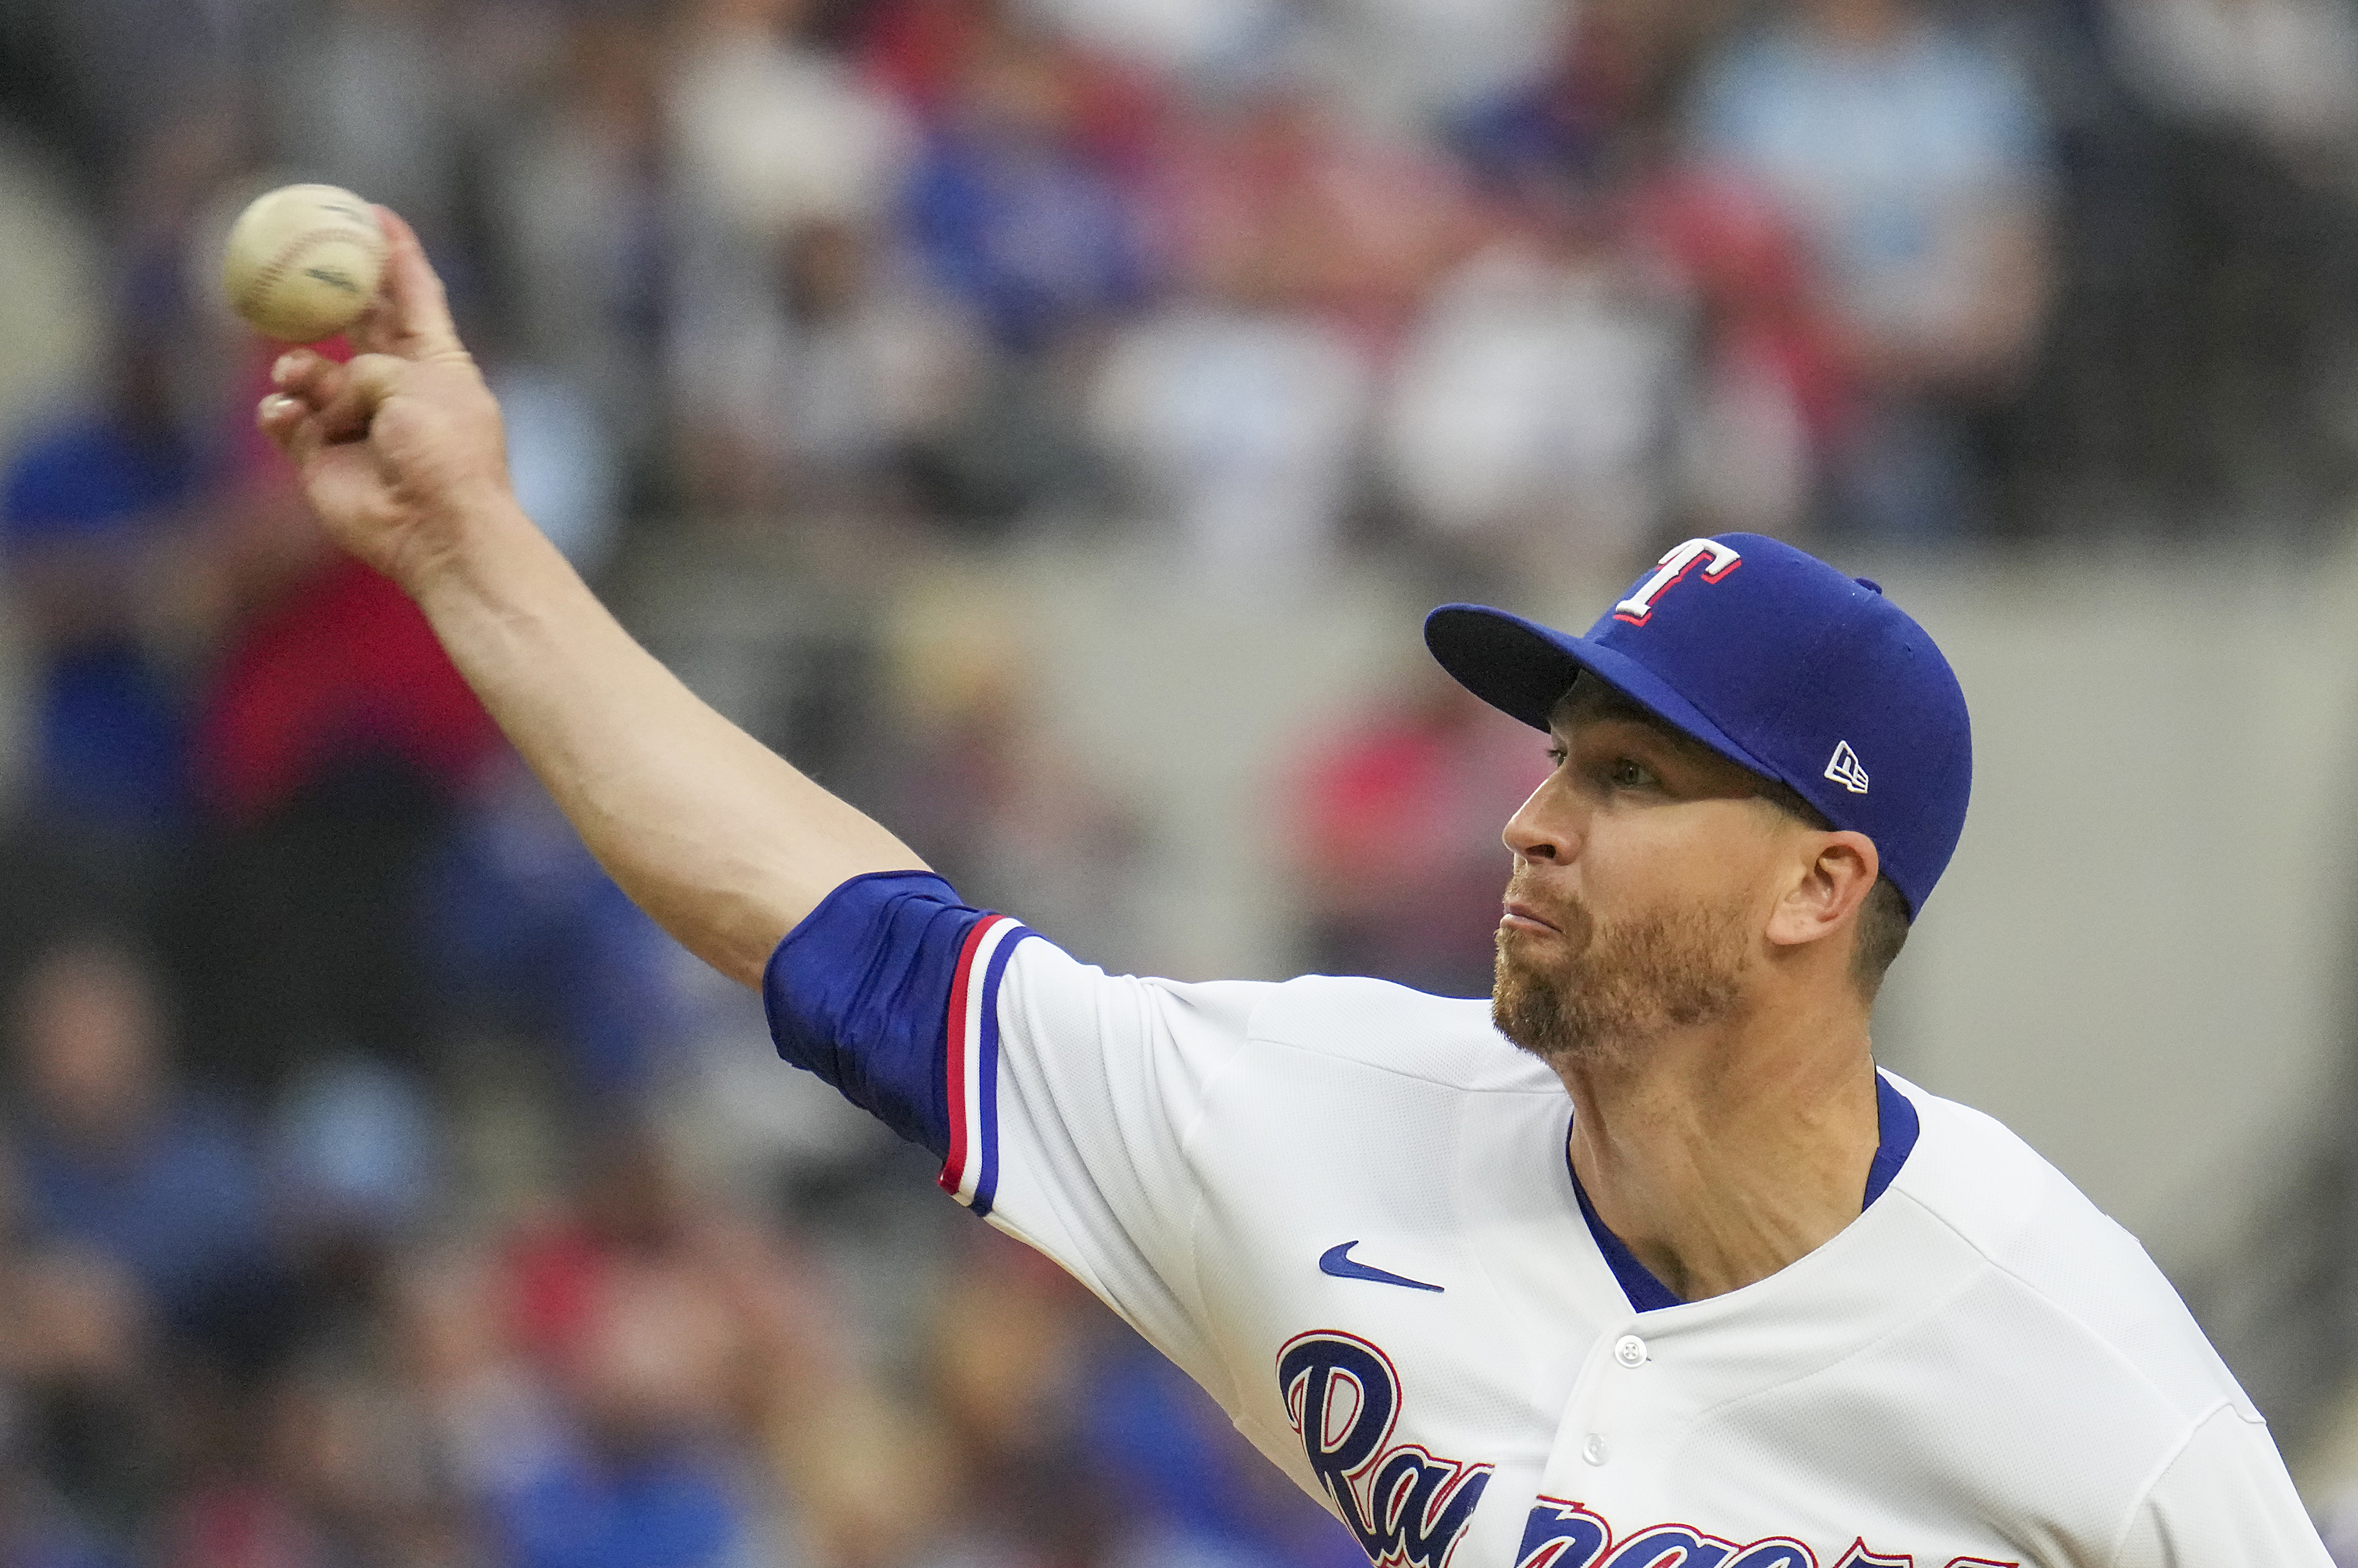 DeGrom Day: Texas Rangers SP Jacob deGrom looks to bounce back in second  start of 2023